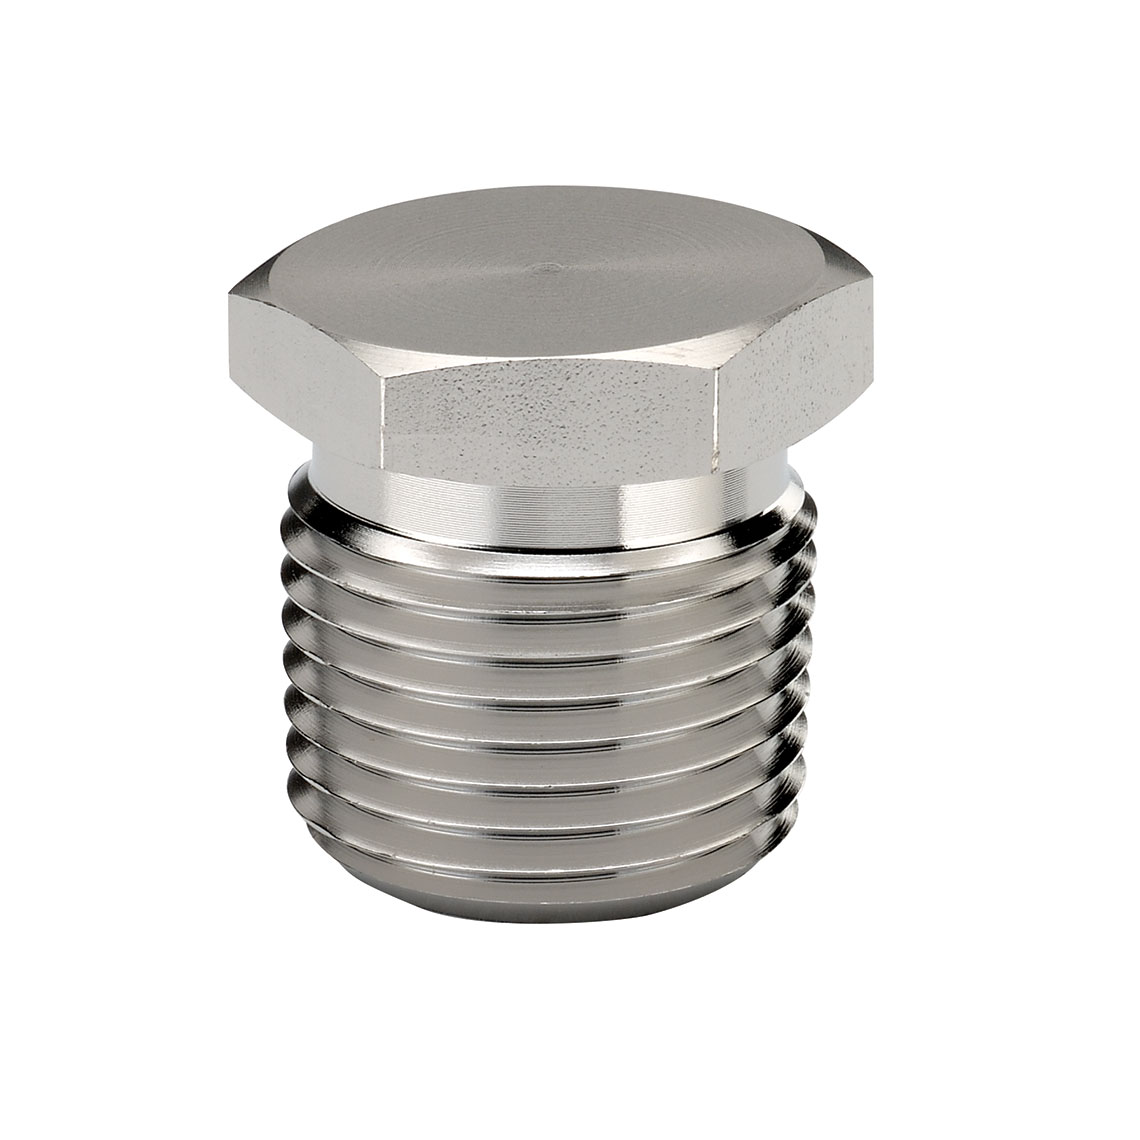 Part Number PG1-SS1-EP, 1/2" National Pipe Thread (NPT) Stainless Steel